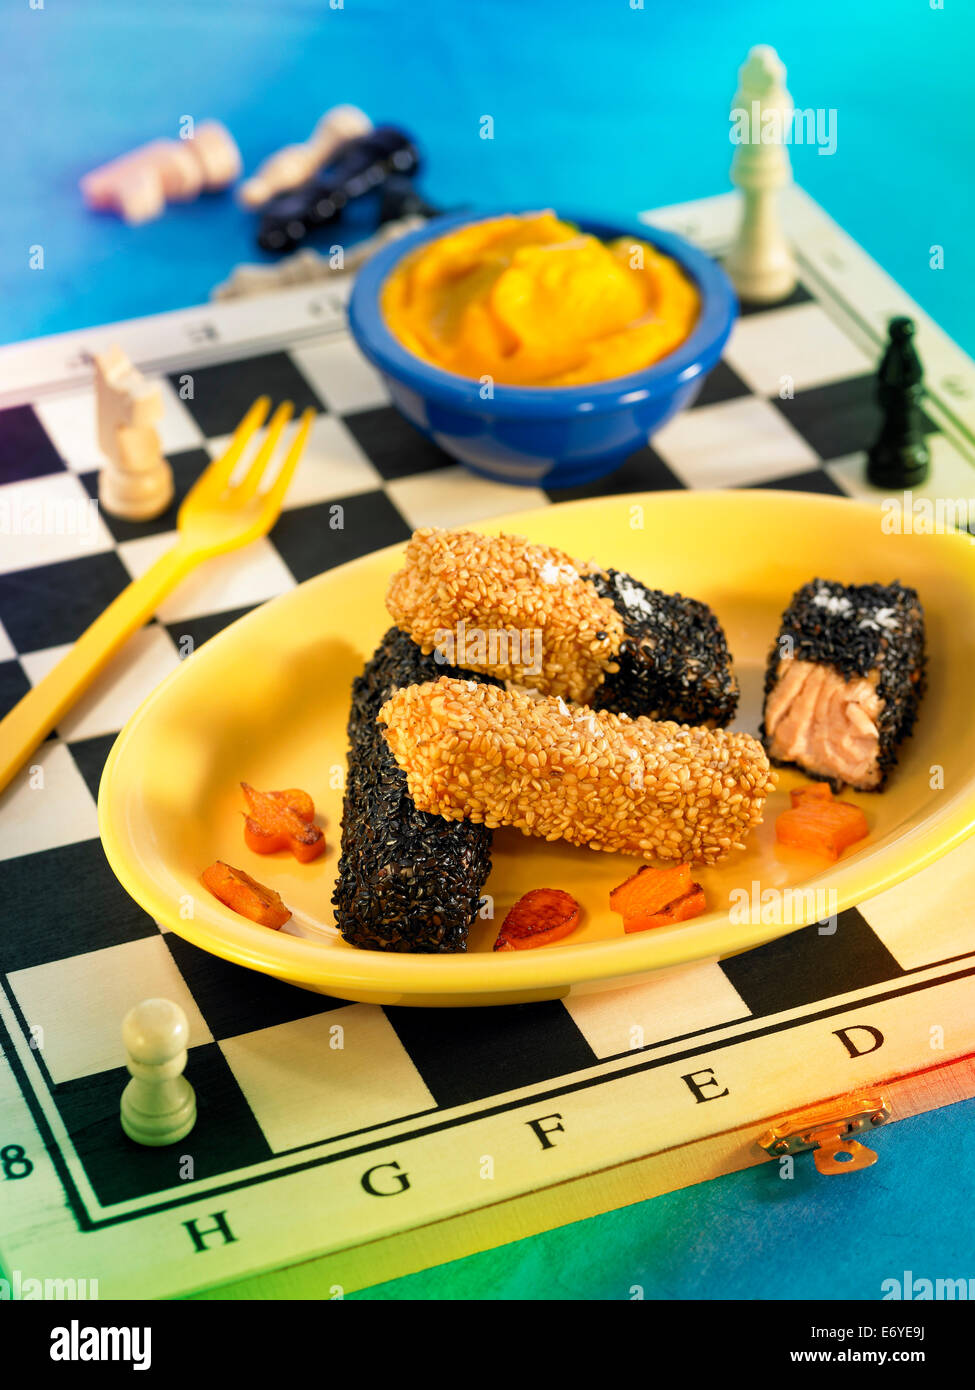 Fish fingers coated in black and golden sesame seeds Stock Photo